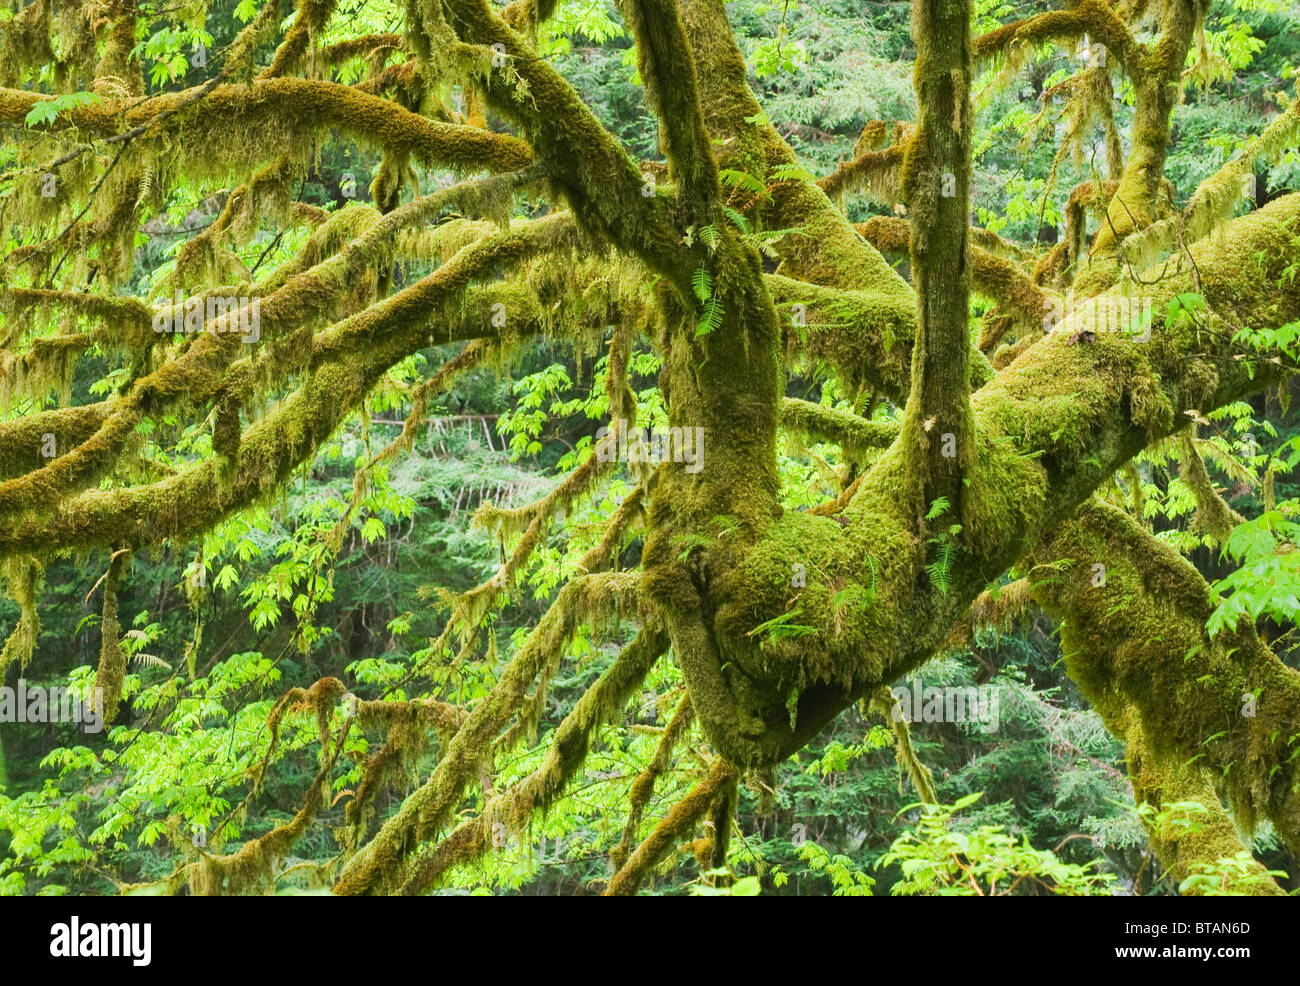 Mossy forest interior, Redwood National park, California Stock Photo